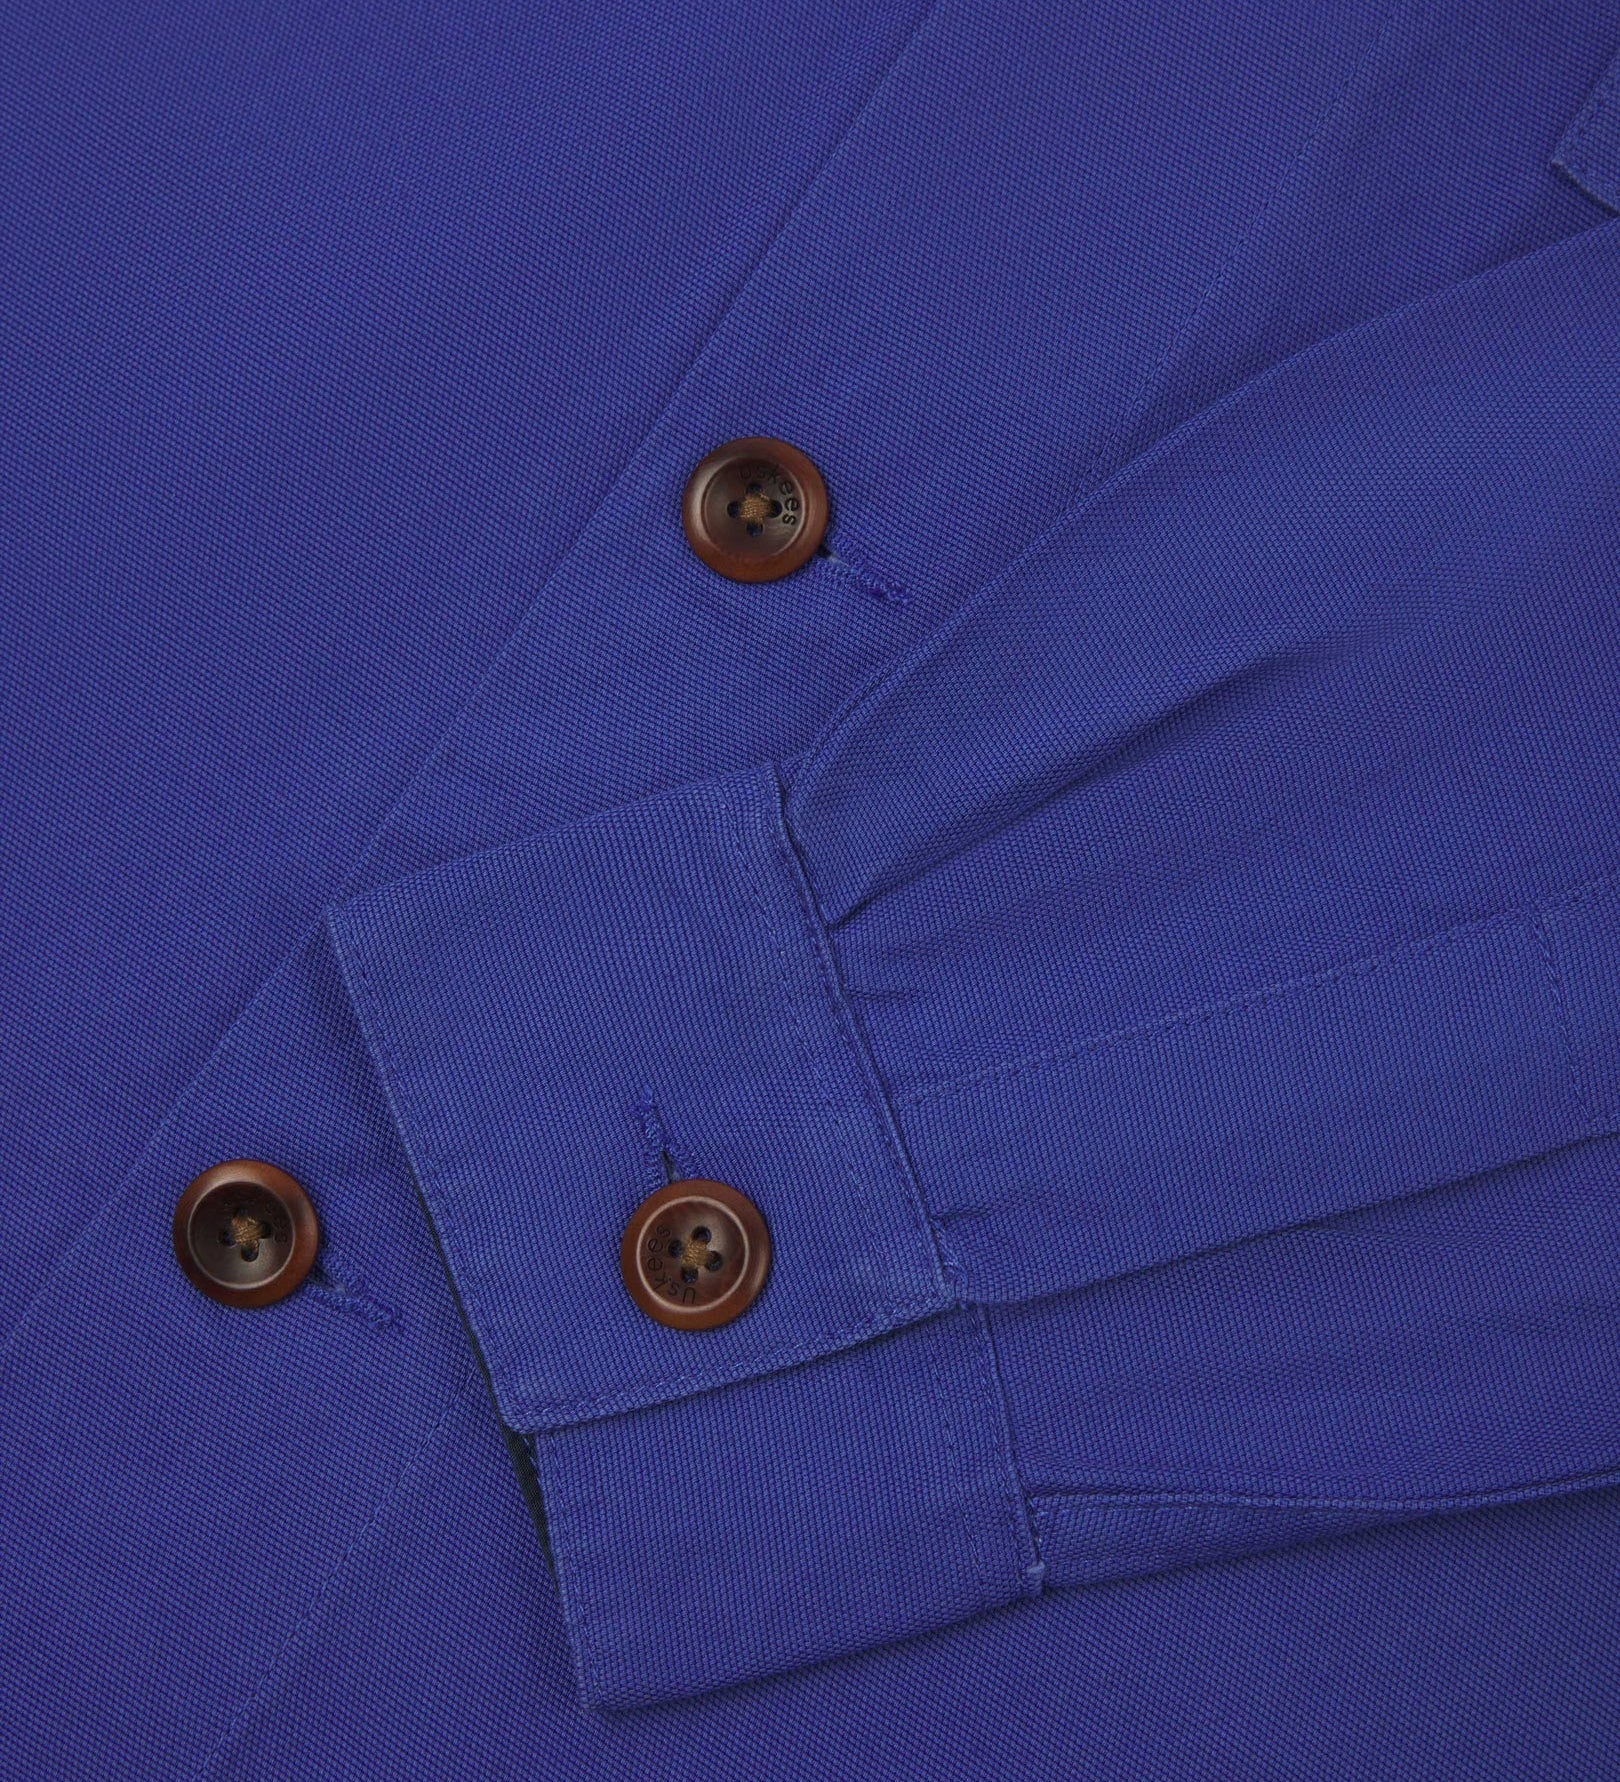 View of the mid-section and sleeve of the 3003 Uskees button-down work shirt in ultra blue with focus on cuff, placket and corozo buttons.